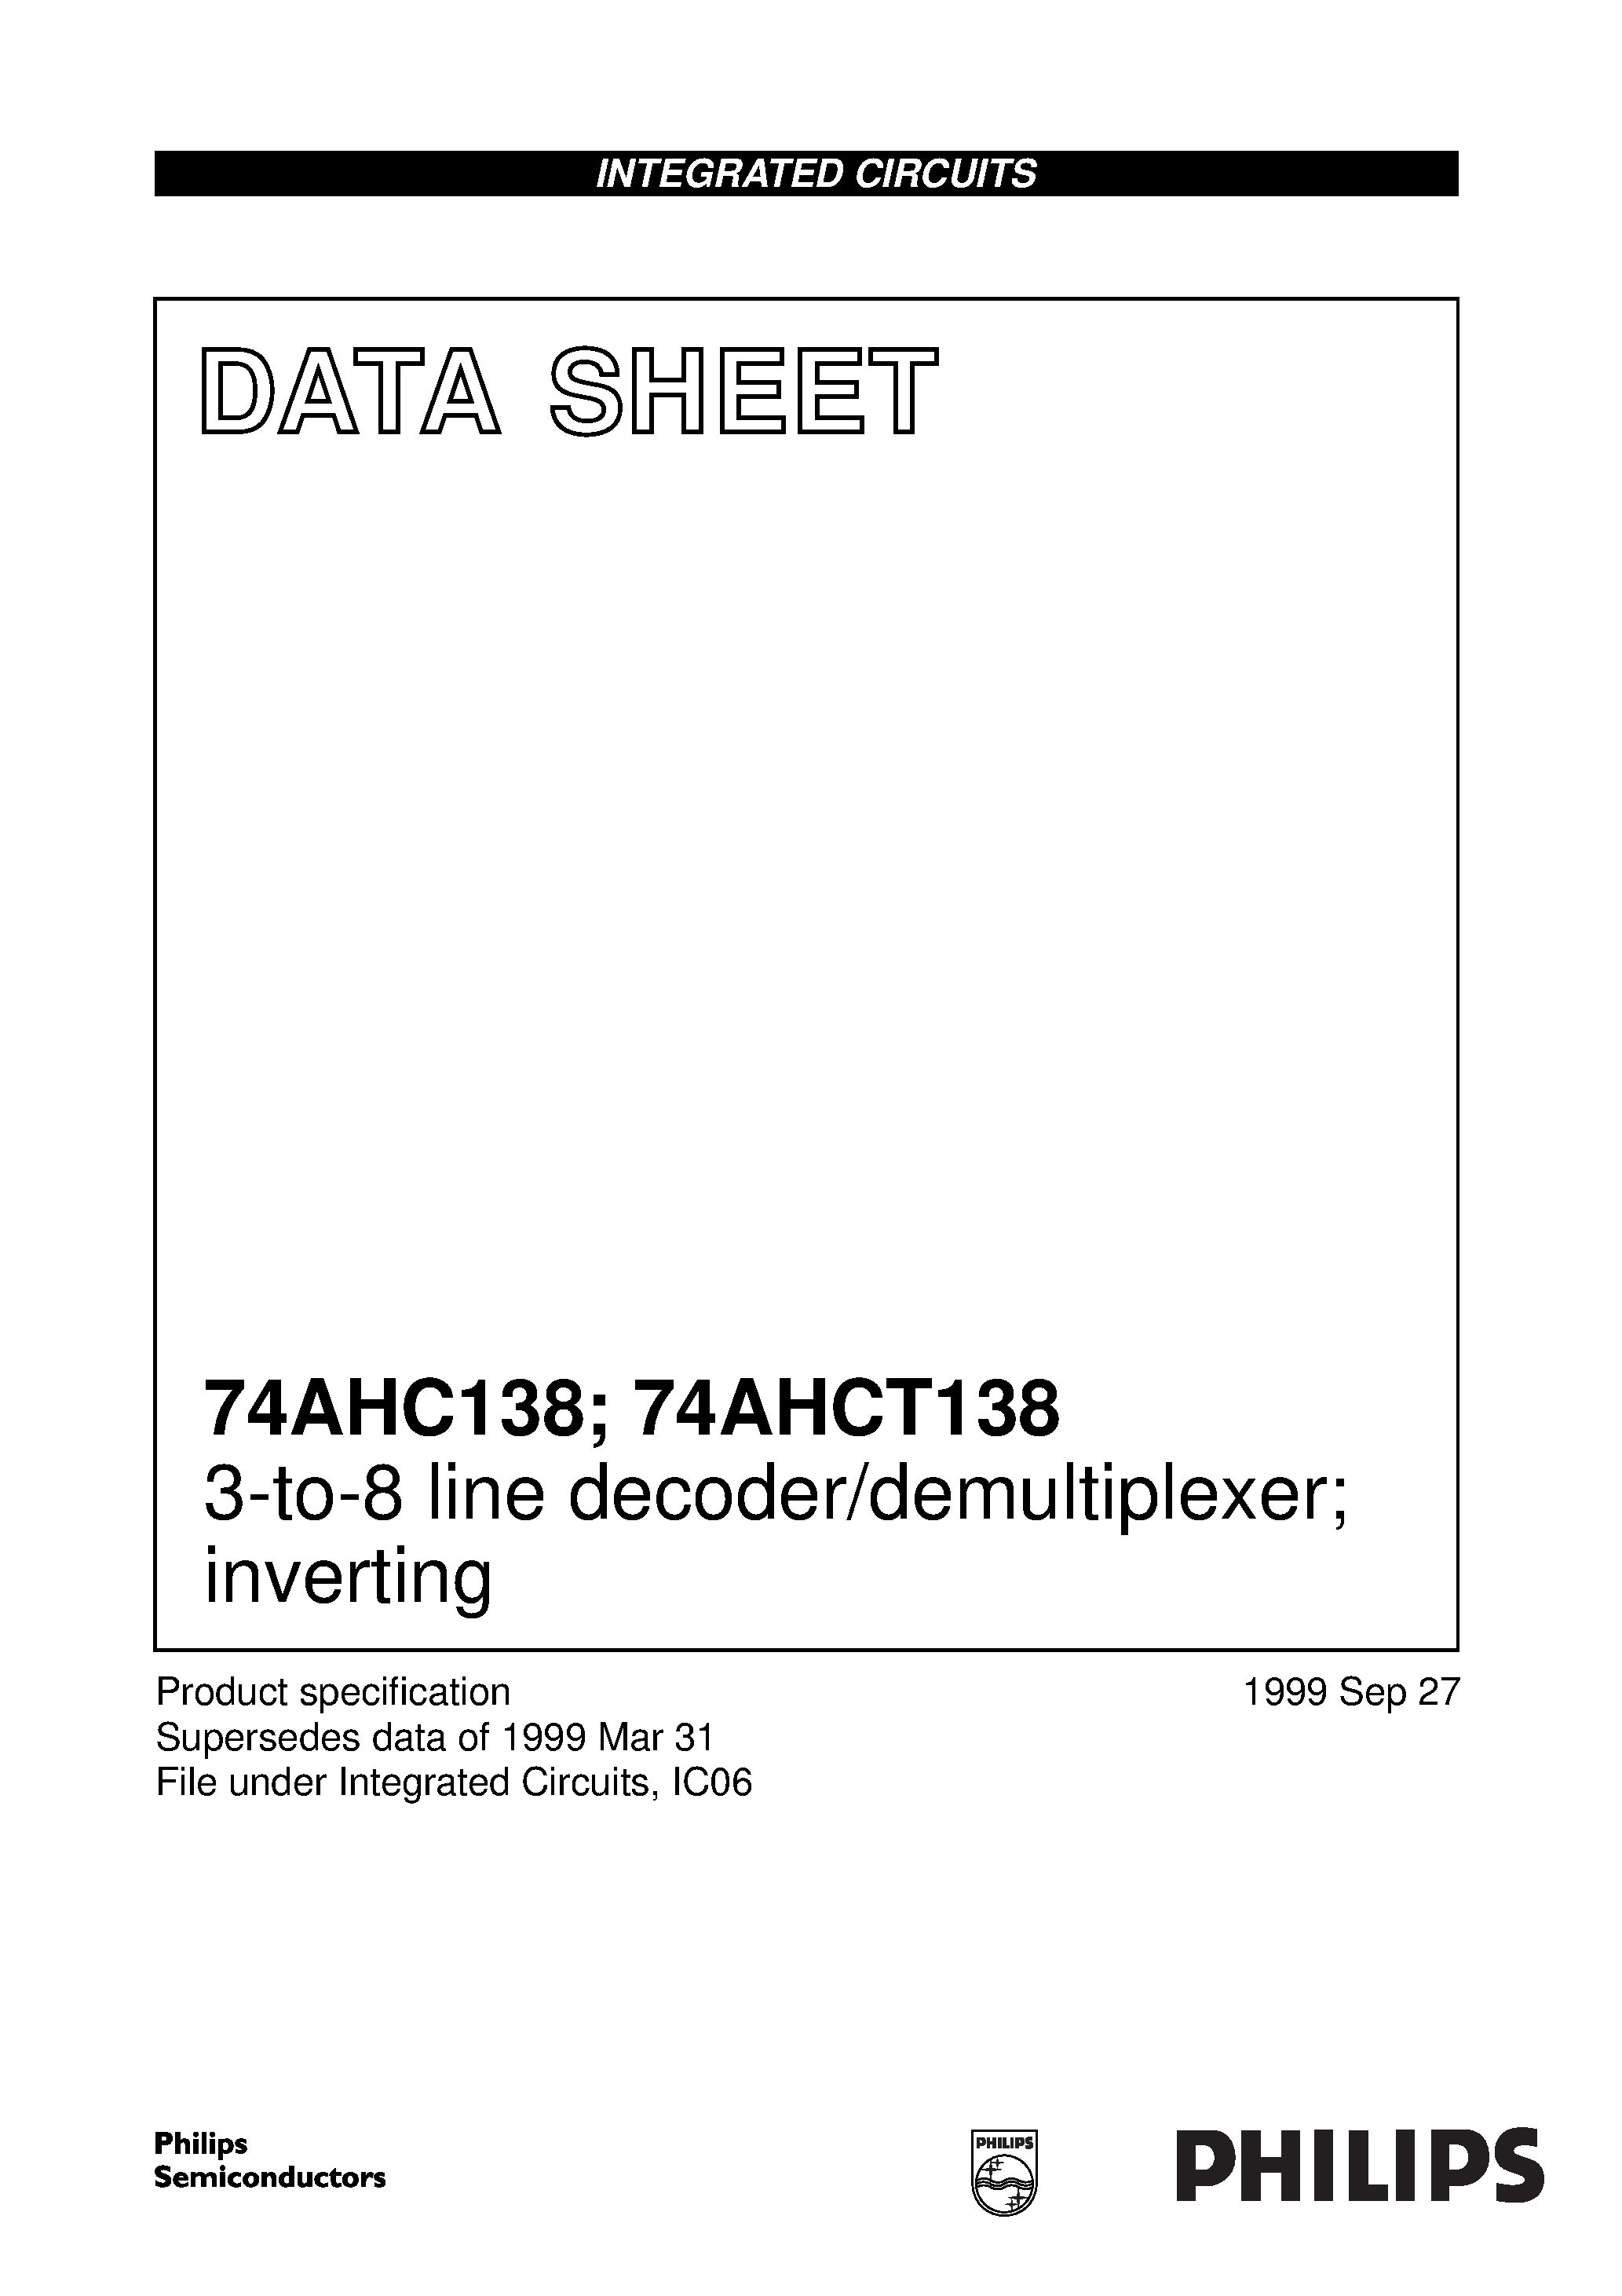 Datasheet 74AHC138PW - 3-to-8 line decoder/demultiplexer; inverting page 1